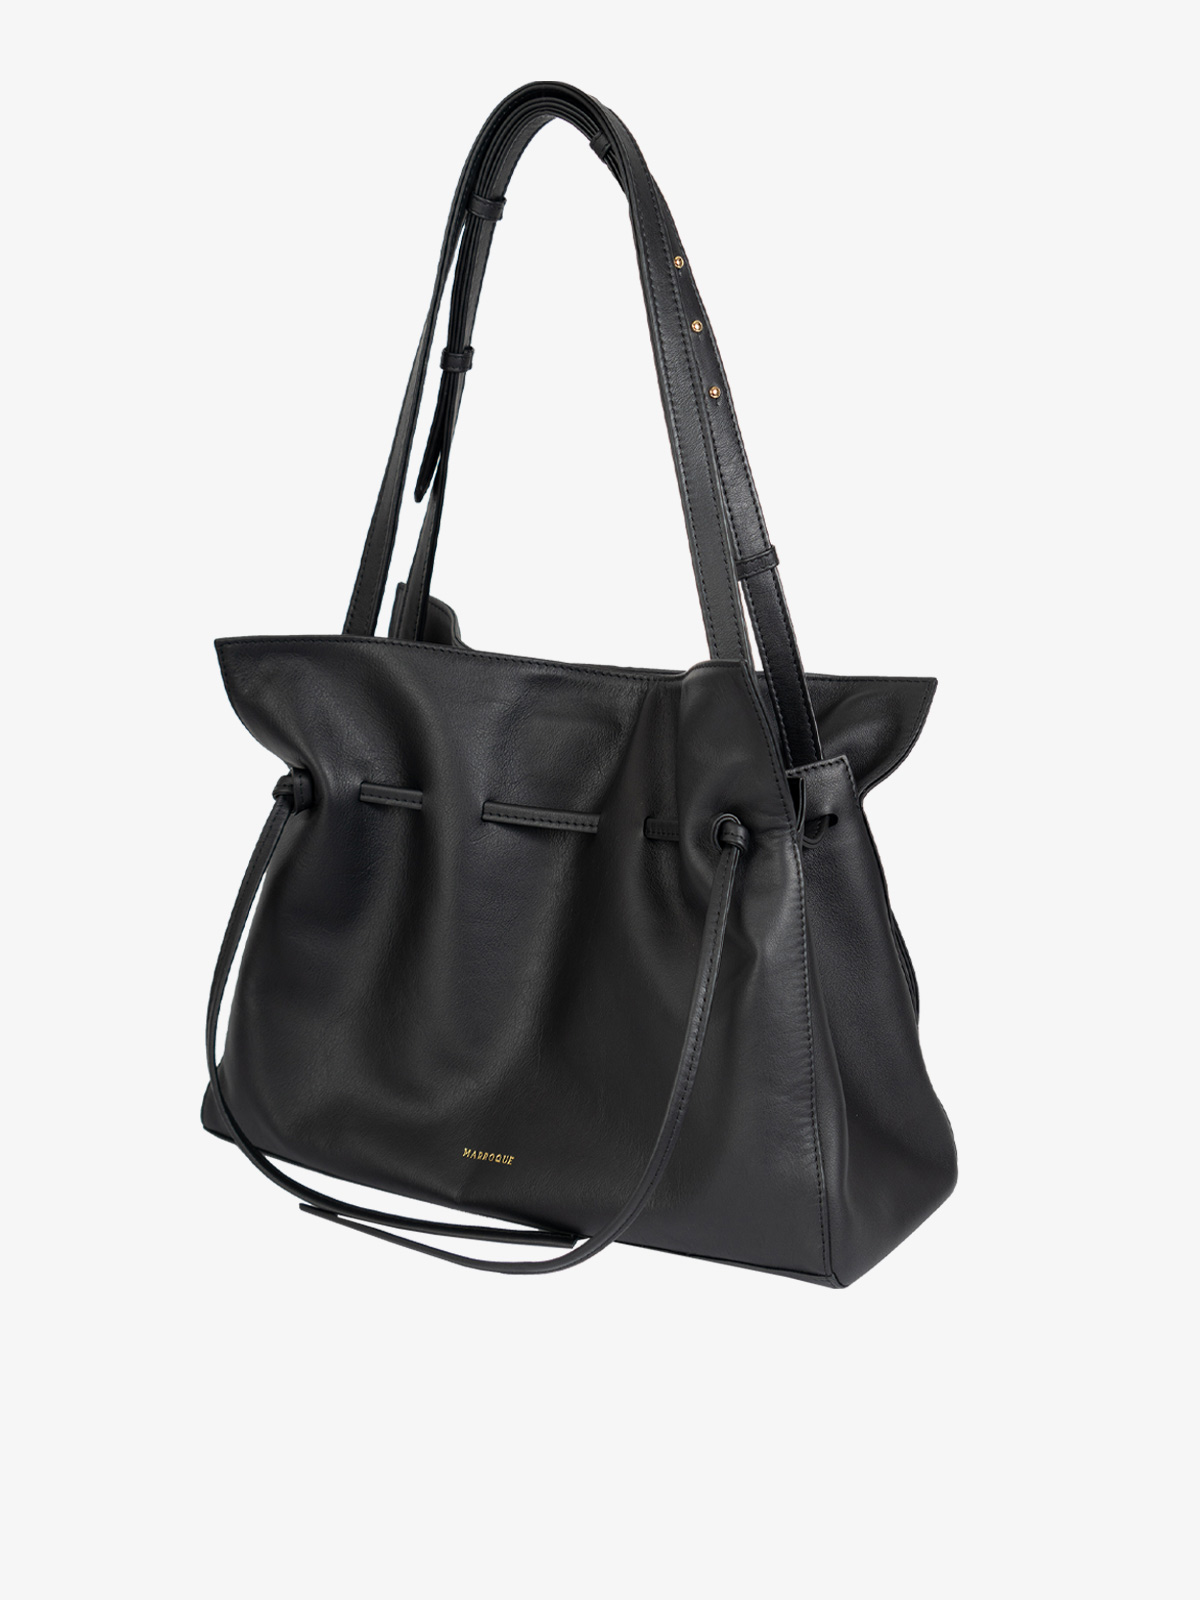 marroque wendy-tote-blackink-leather bag.